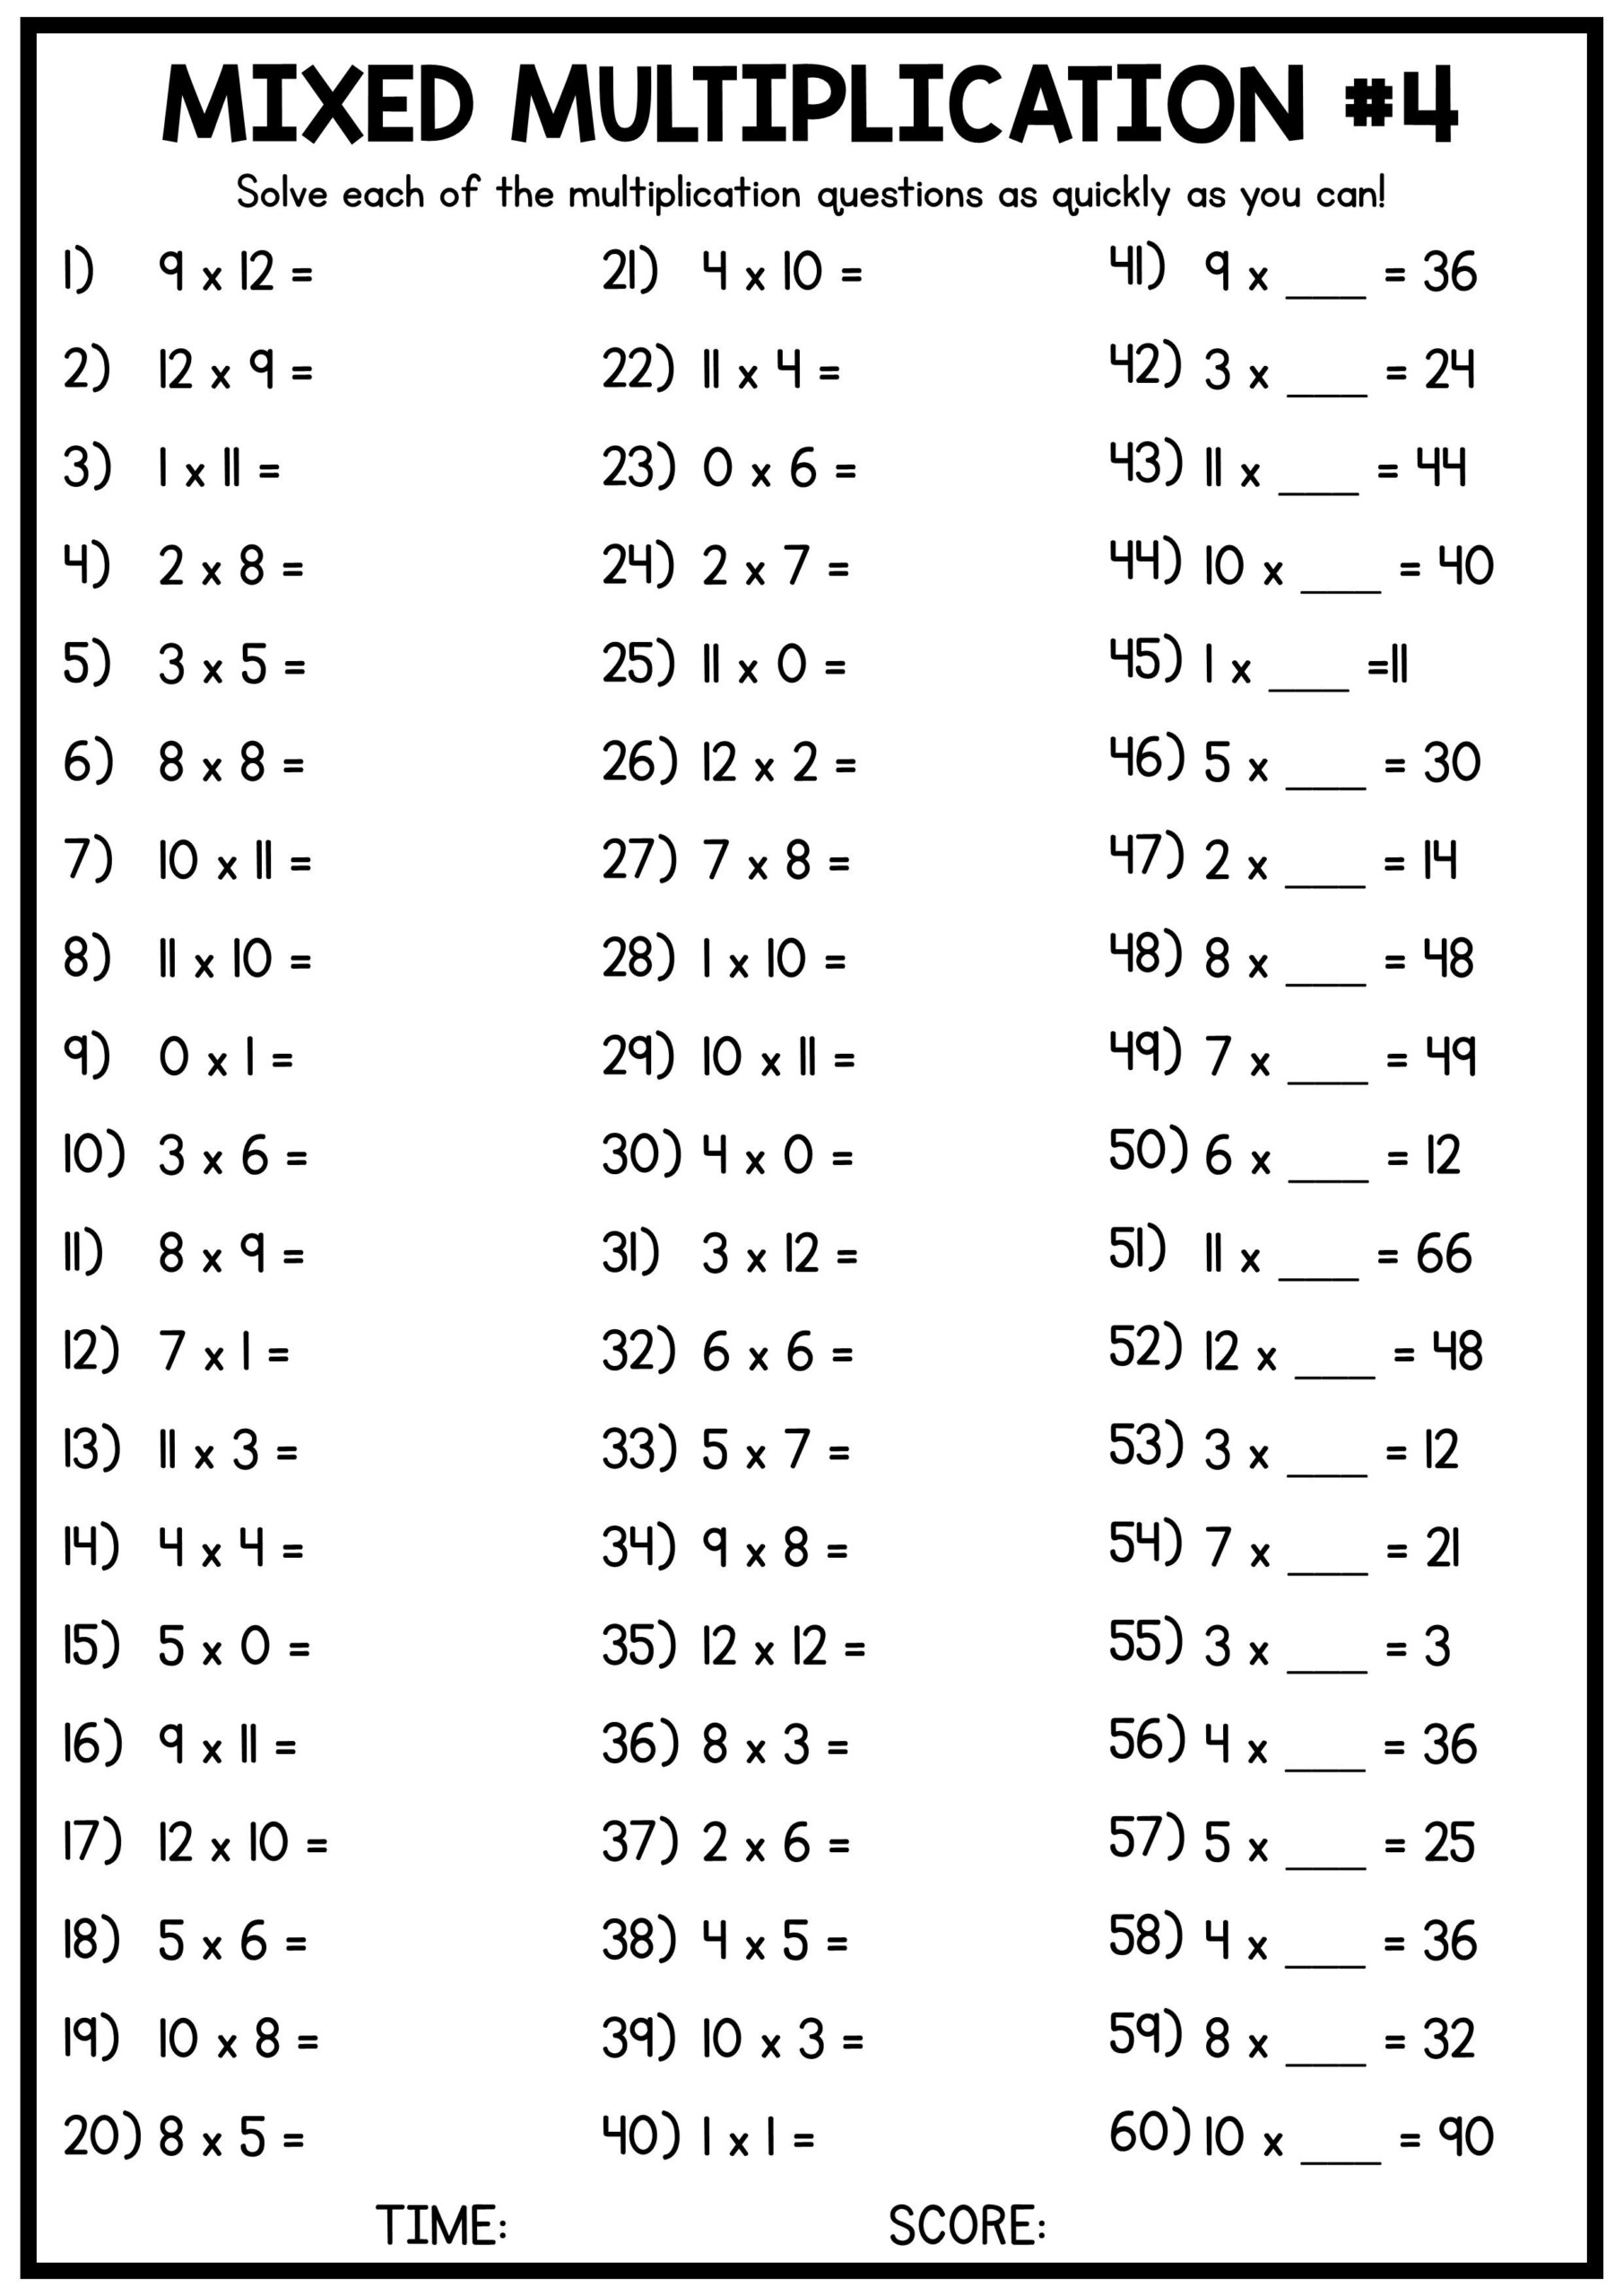 Mixed Multiplication Times Table Worksheets - 4 Free